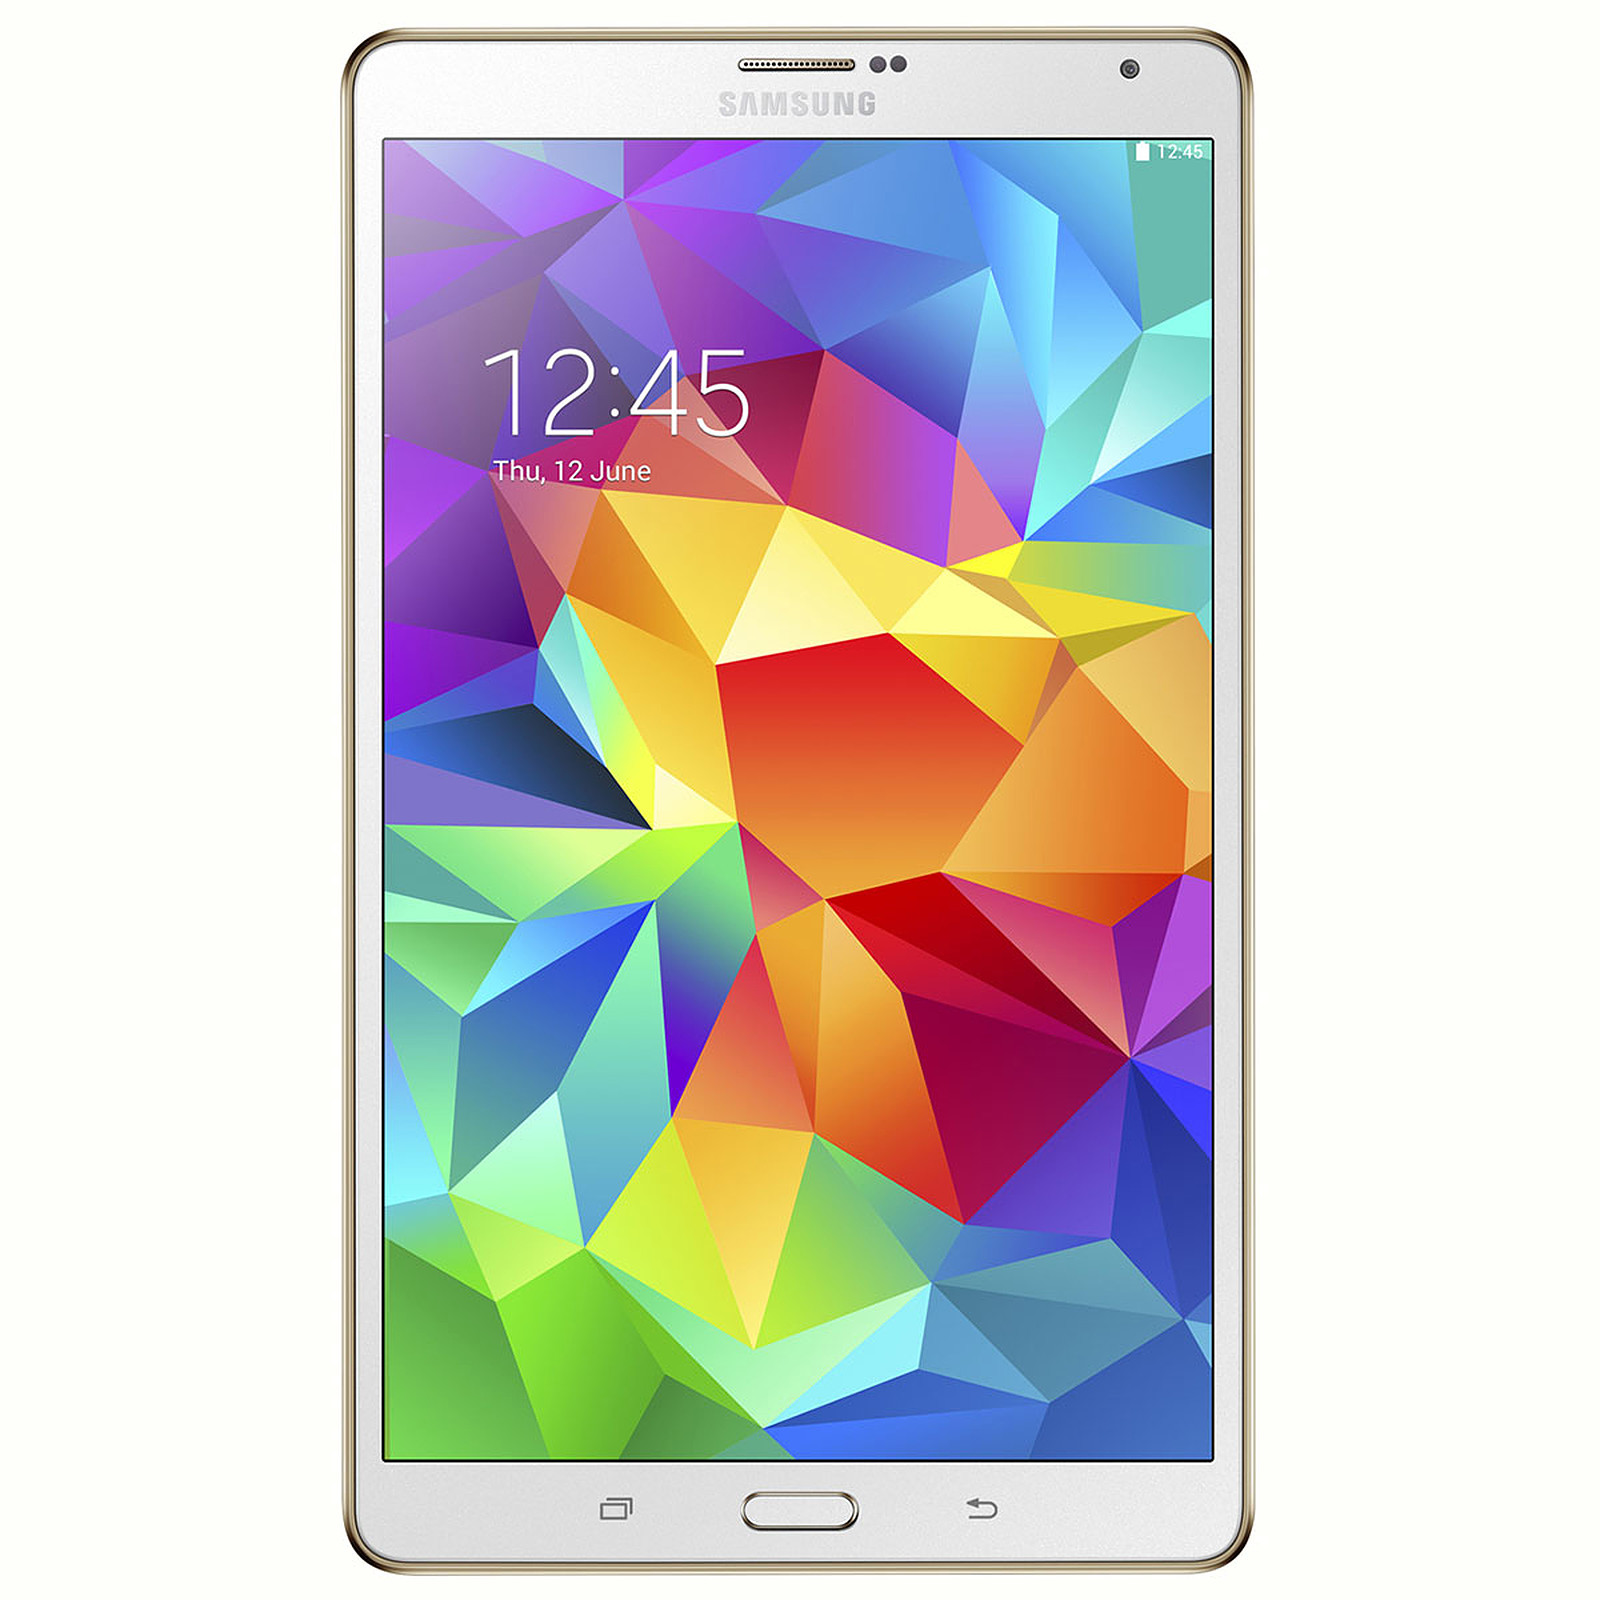 Samsung Galaxy Tab 4 7" SM-T235 8 Go Blanc · Reconditionne - Tablette tactile Samsung